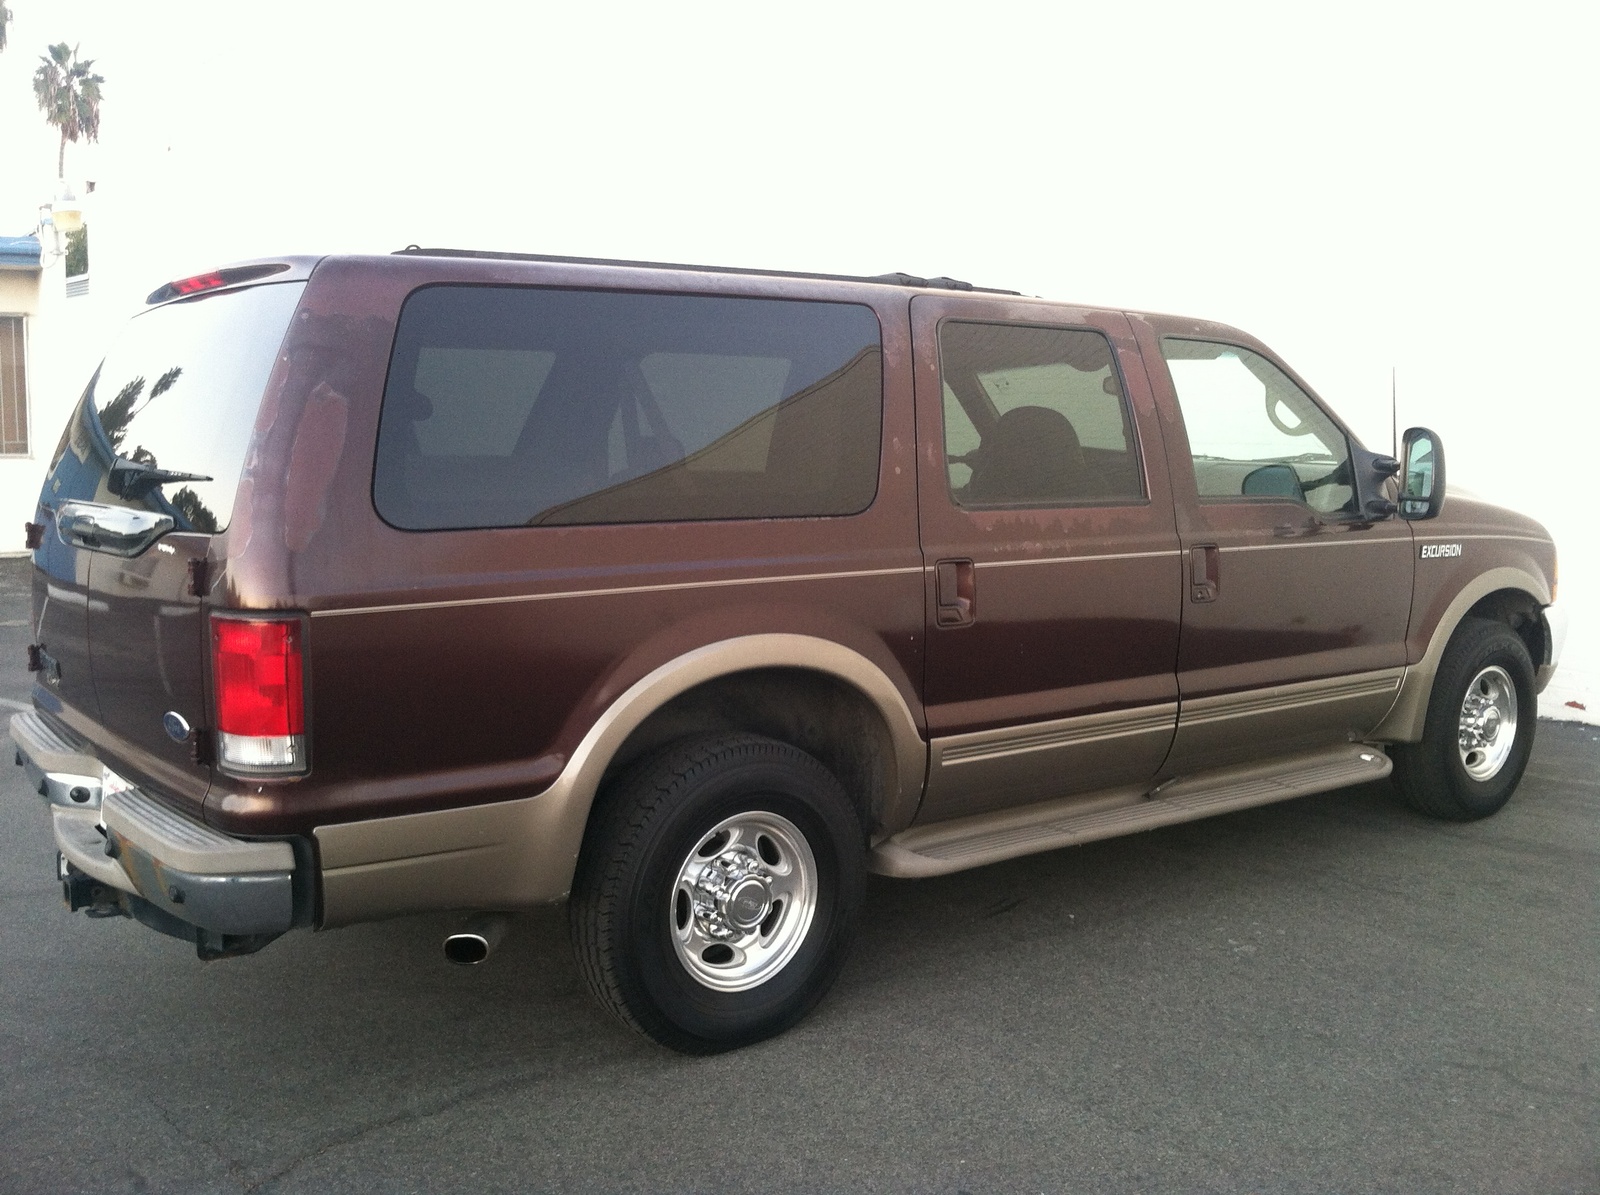 2000 Ford Excursion Limited For Sale In Cargurus  Autos Post